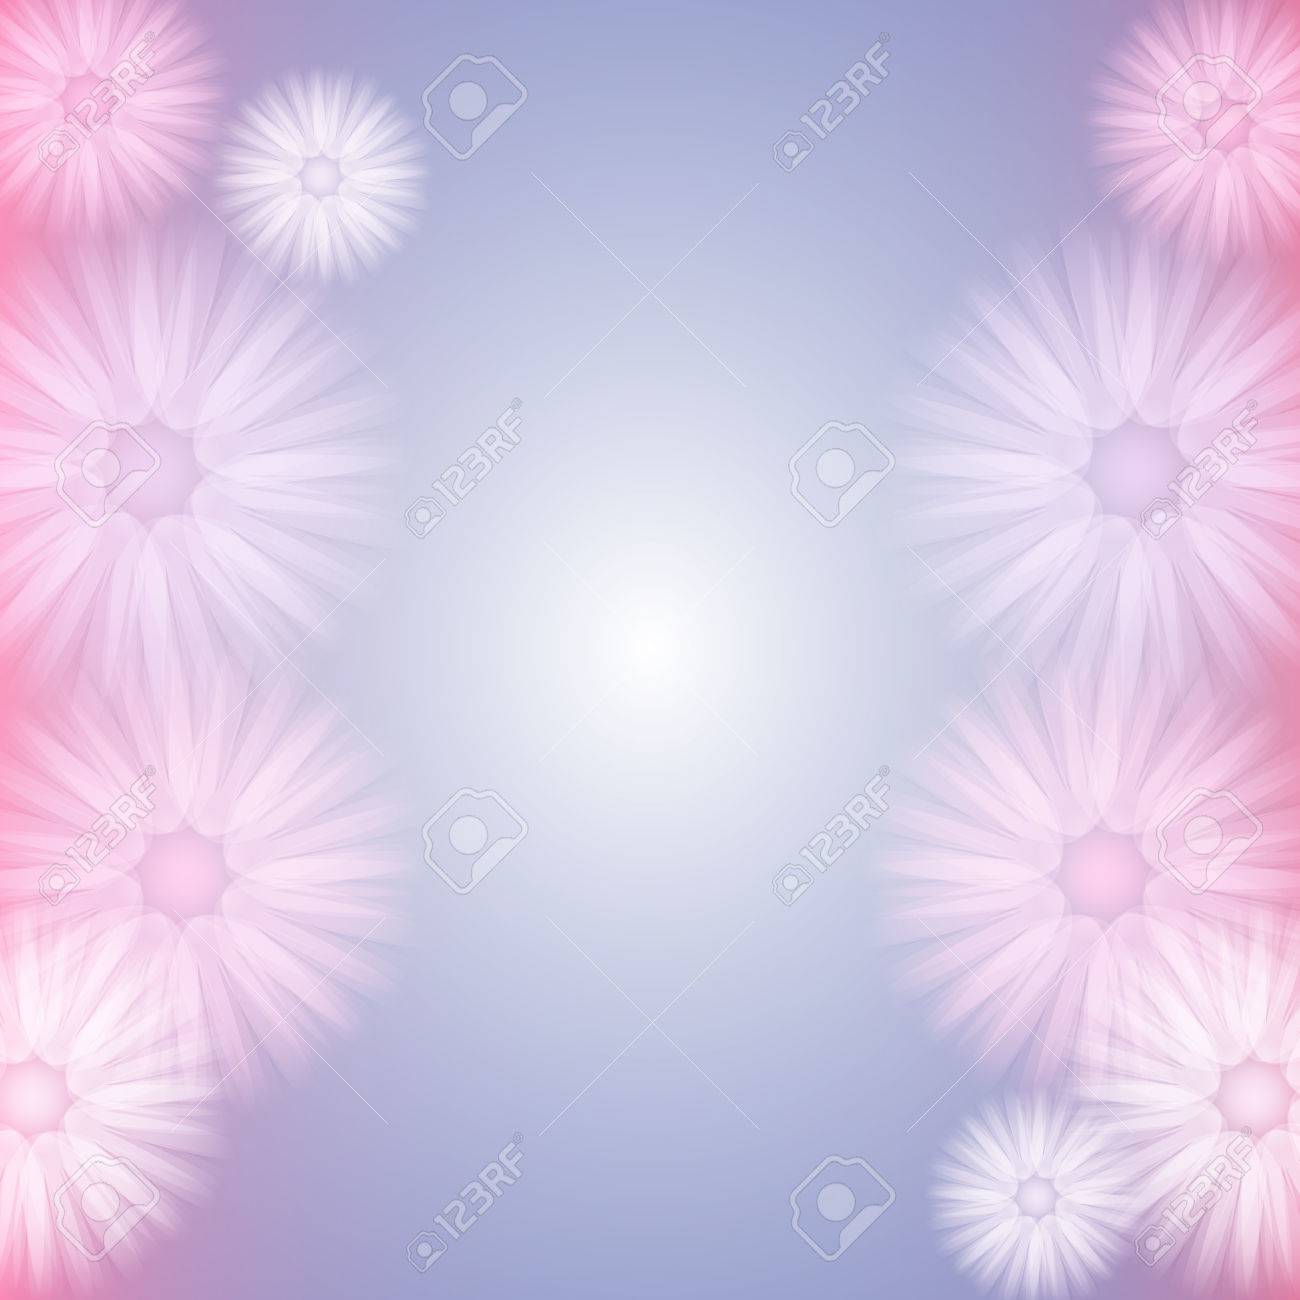 Feminine Background With Abstract Tutu Like Flowers In Pastel